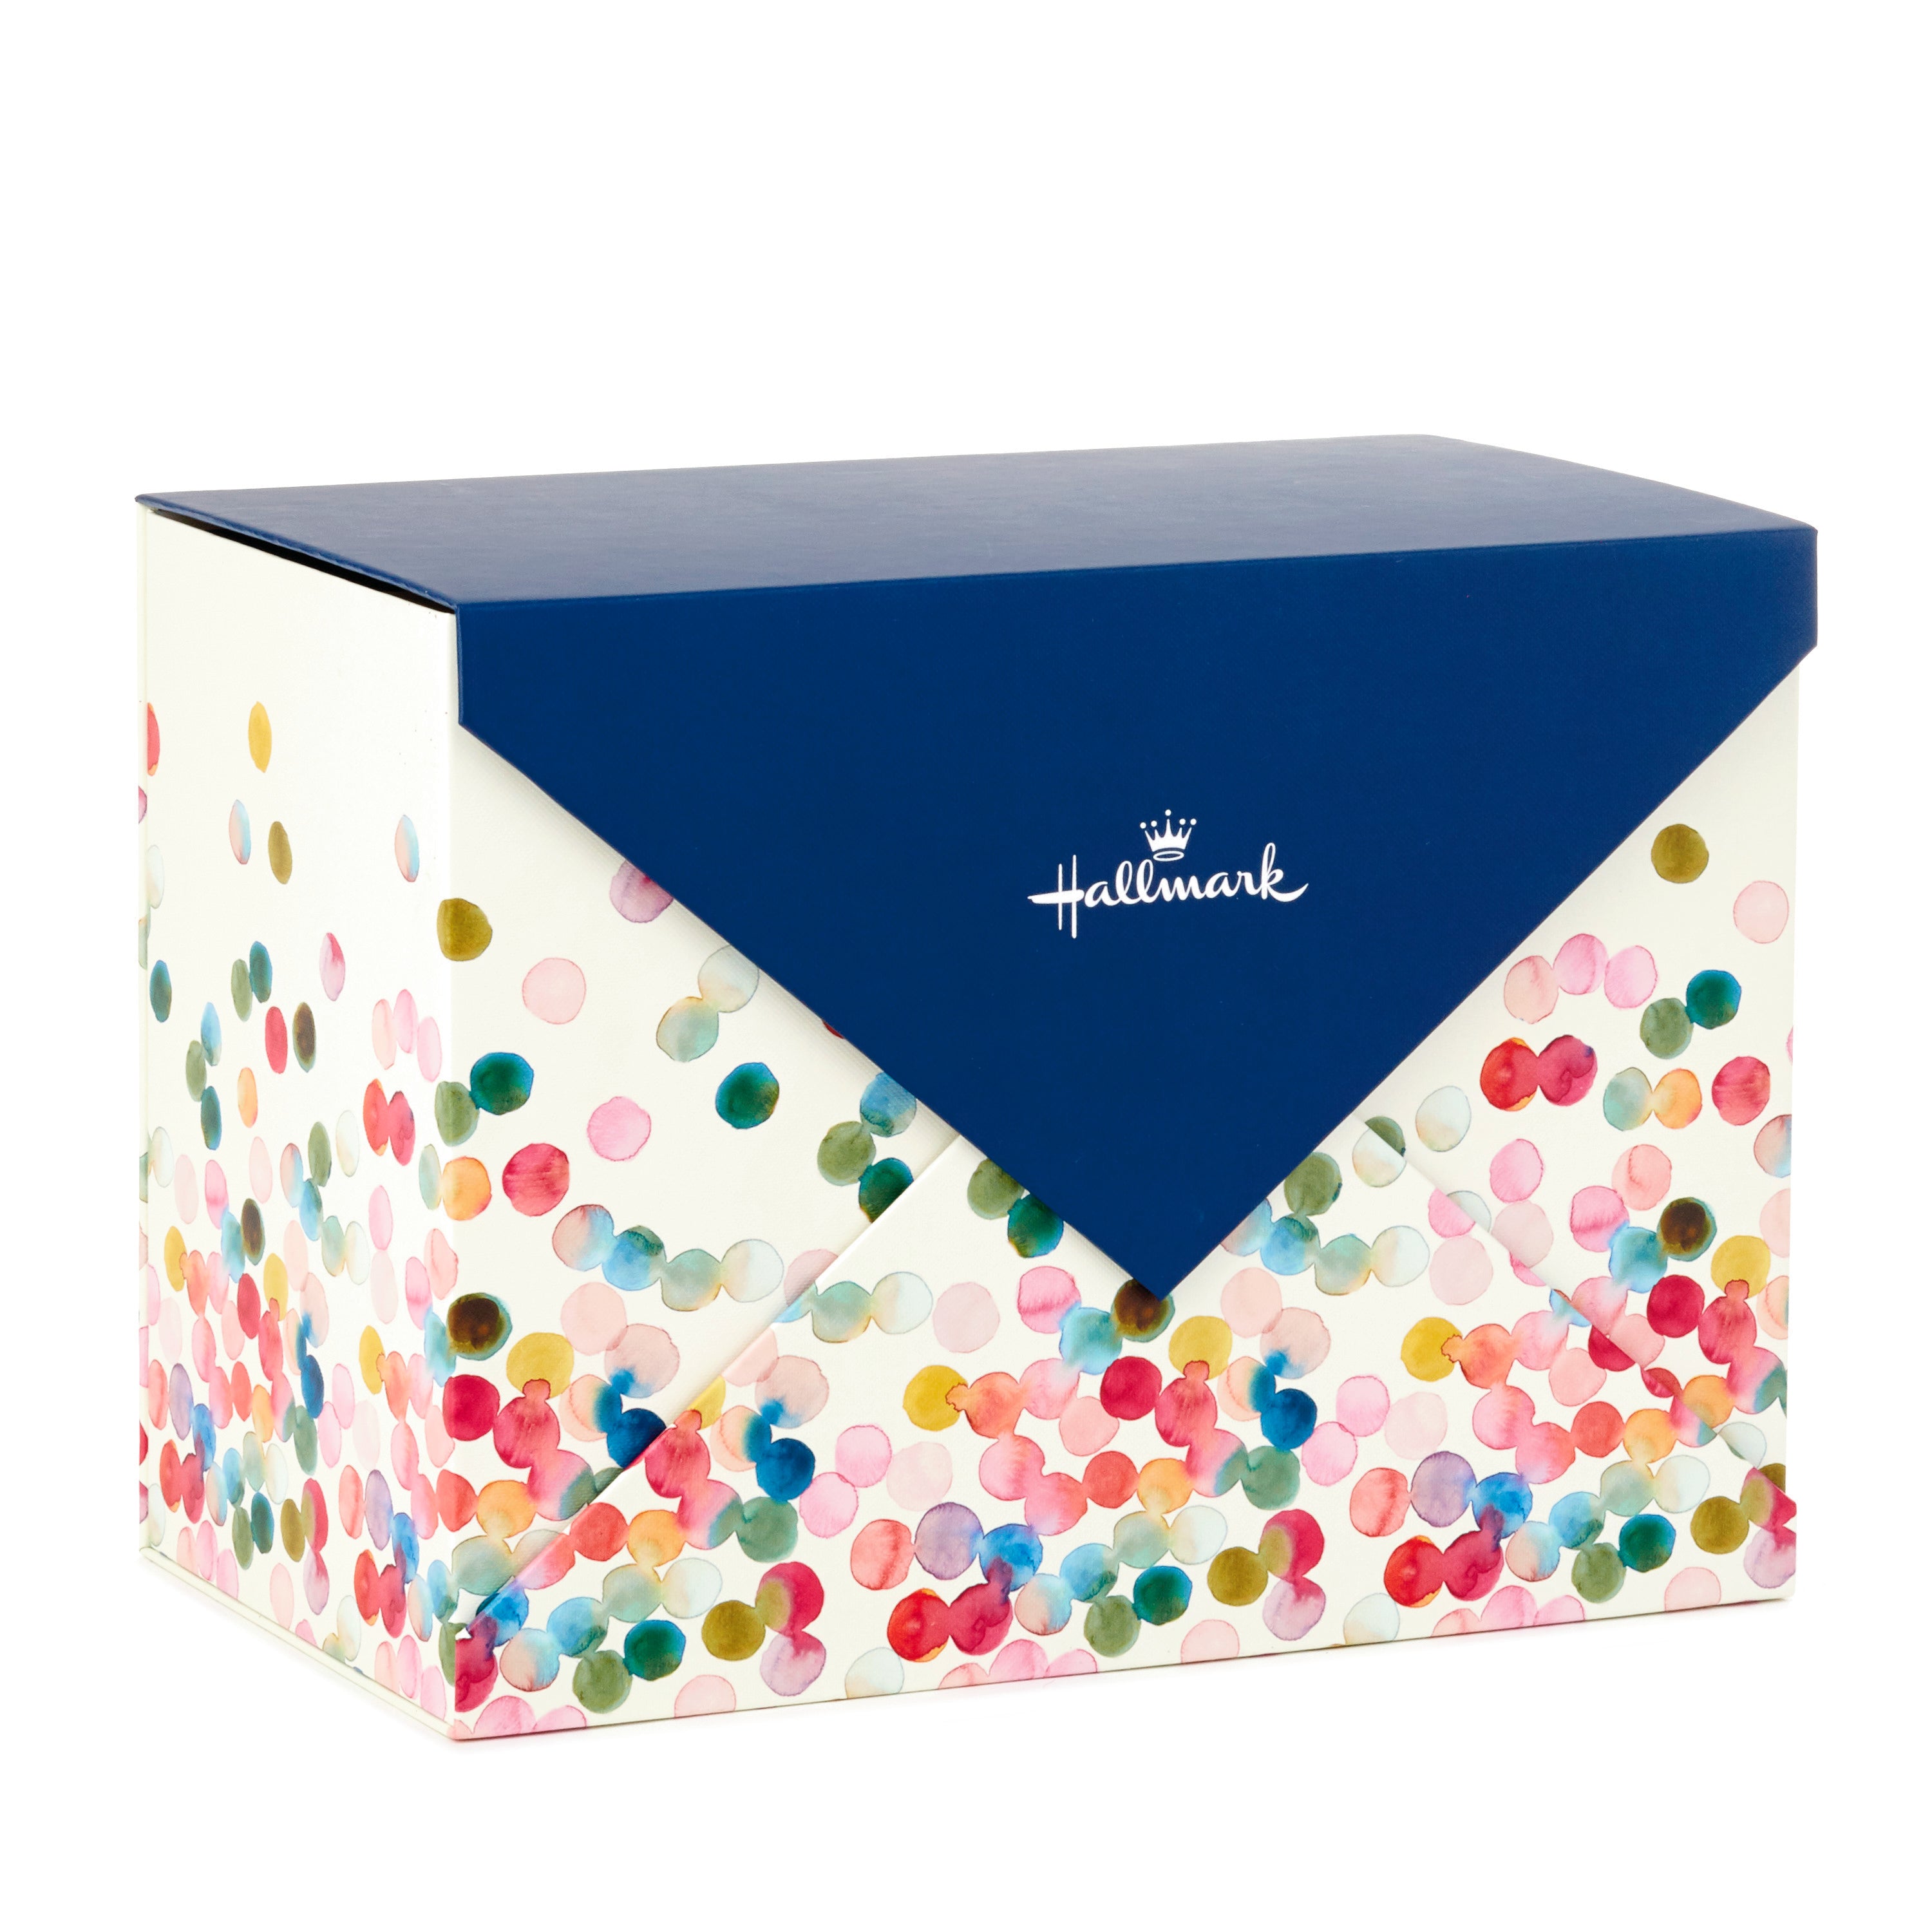 Shop Assorted Greeting Card Boxes for All-Occasions